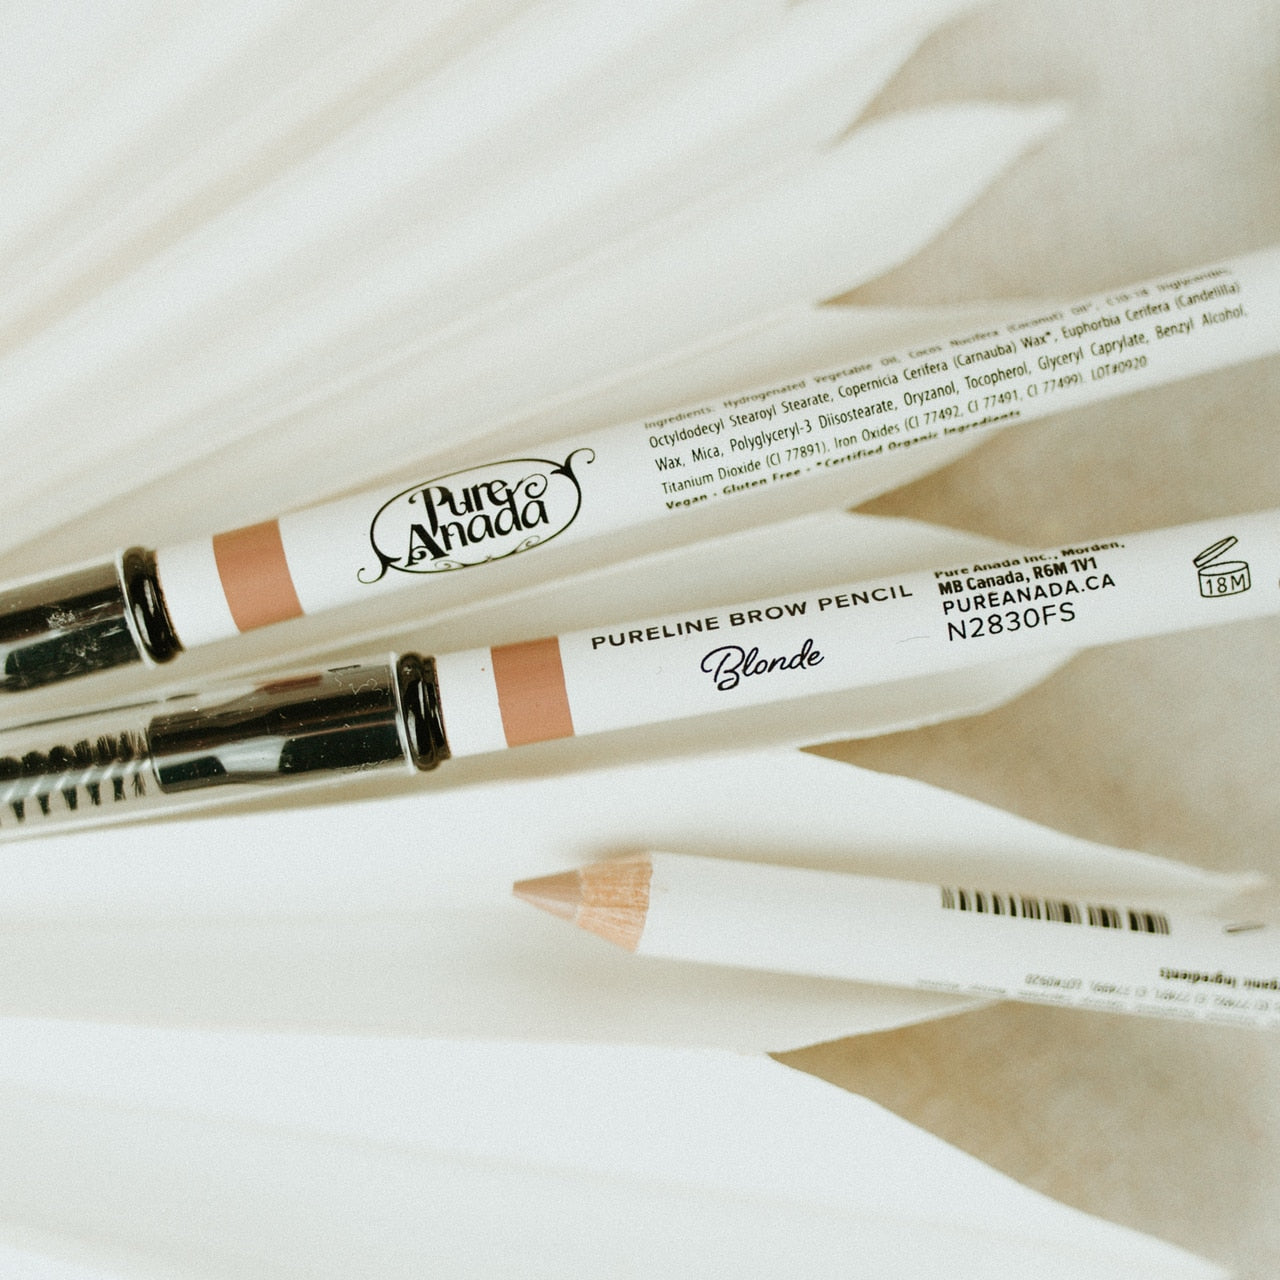 Pure Anada - Pureline Brow Pencil All Things Being Eco Chiliwack Blonde